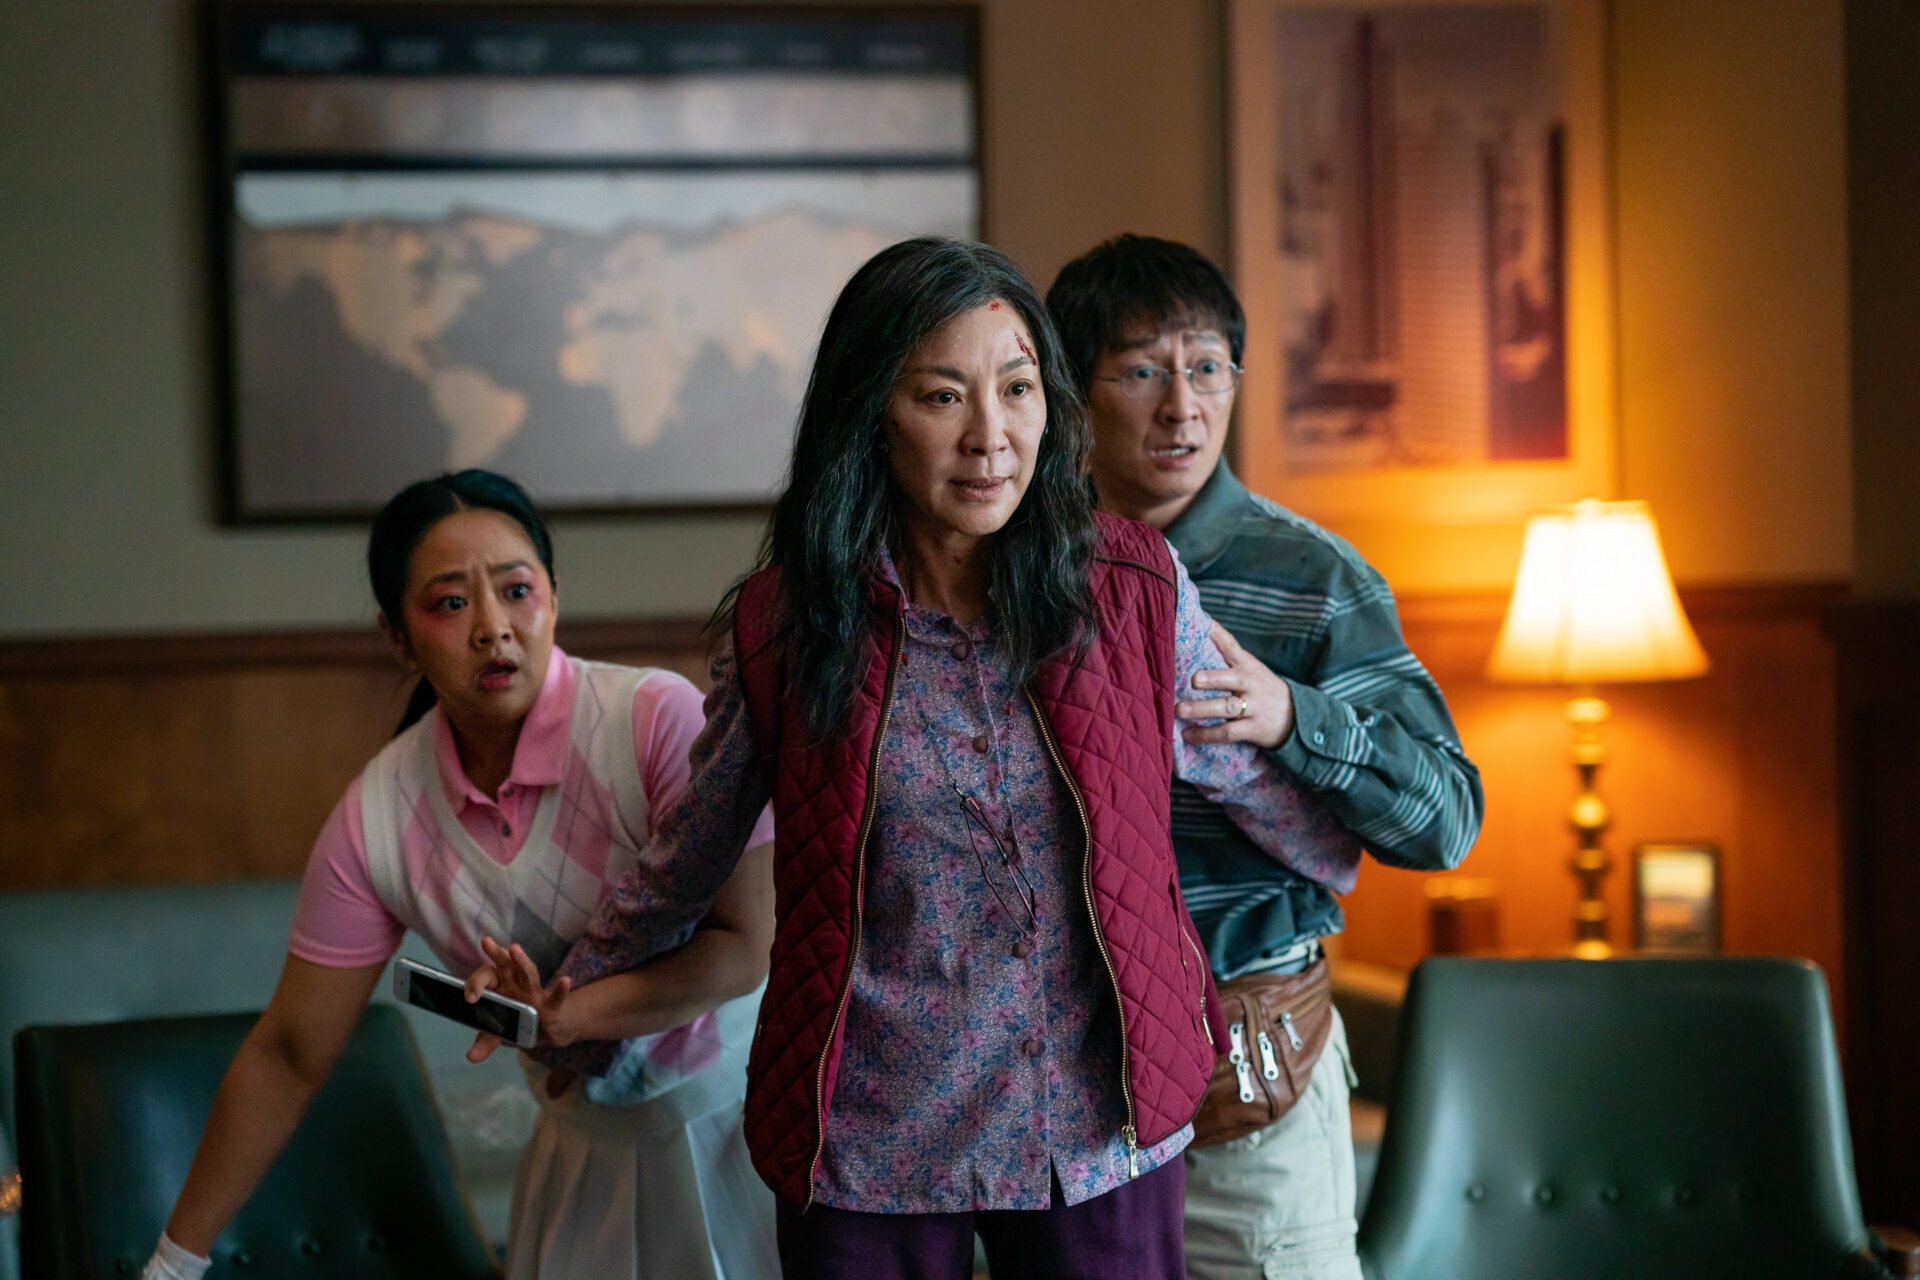 Evelyn (Michael Joh, center) uses her new powers to protect those around her